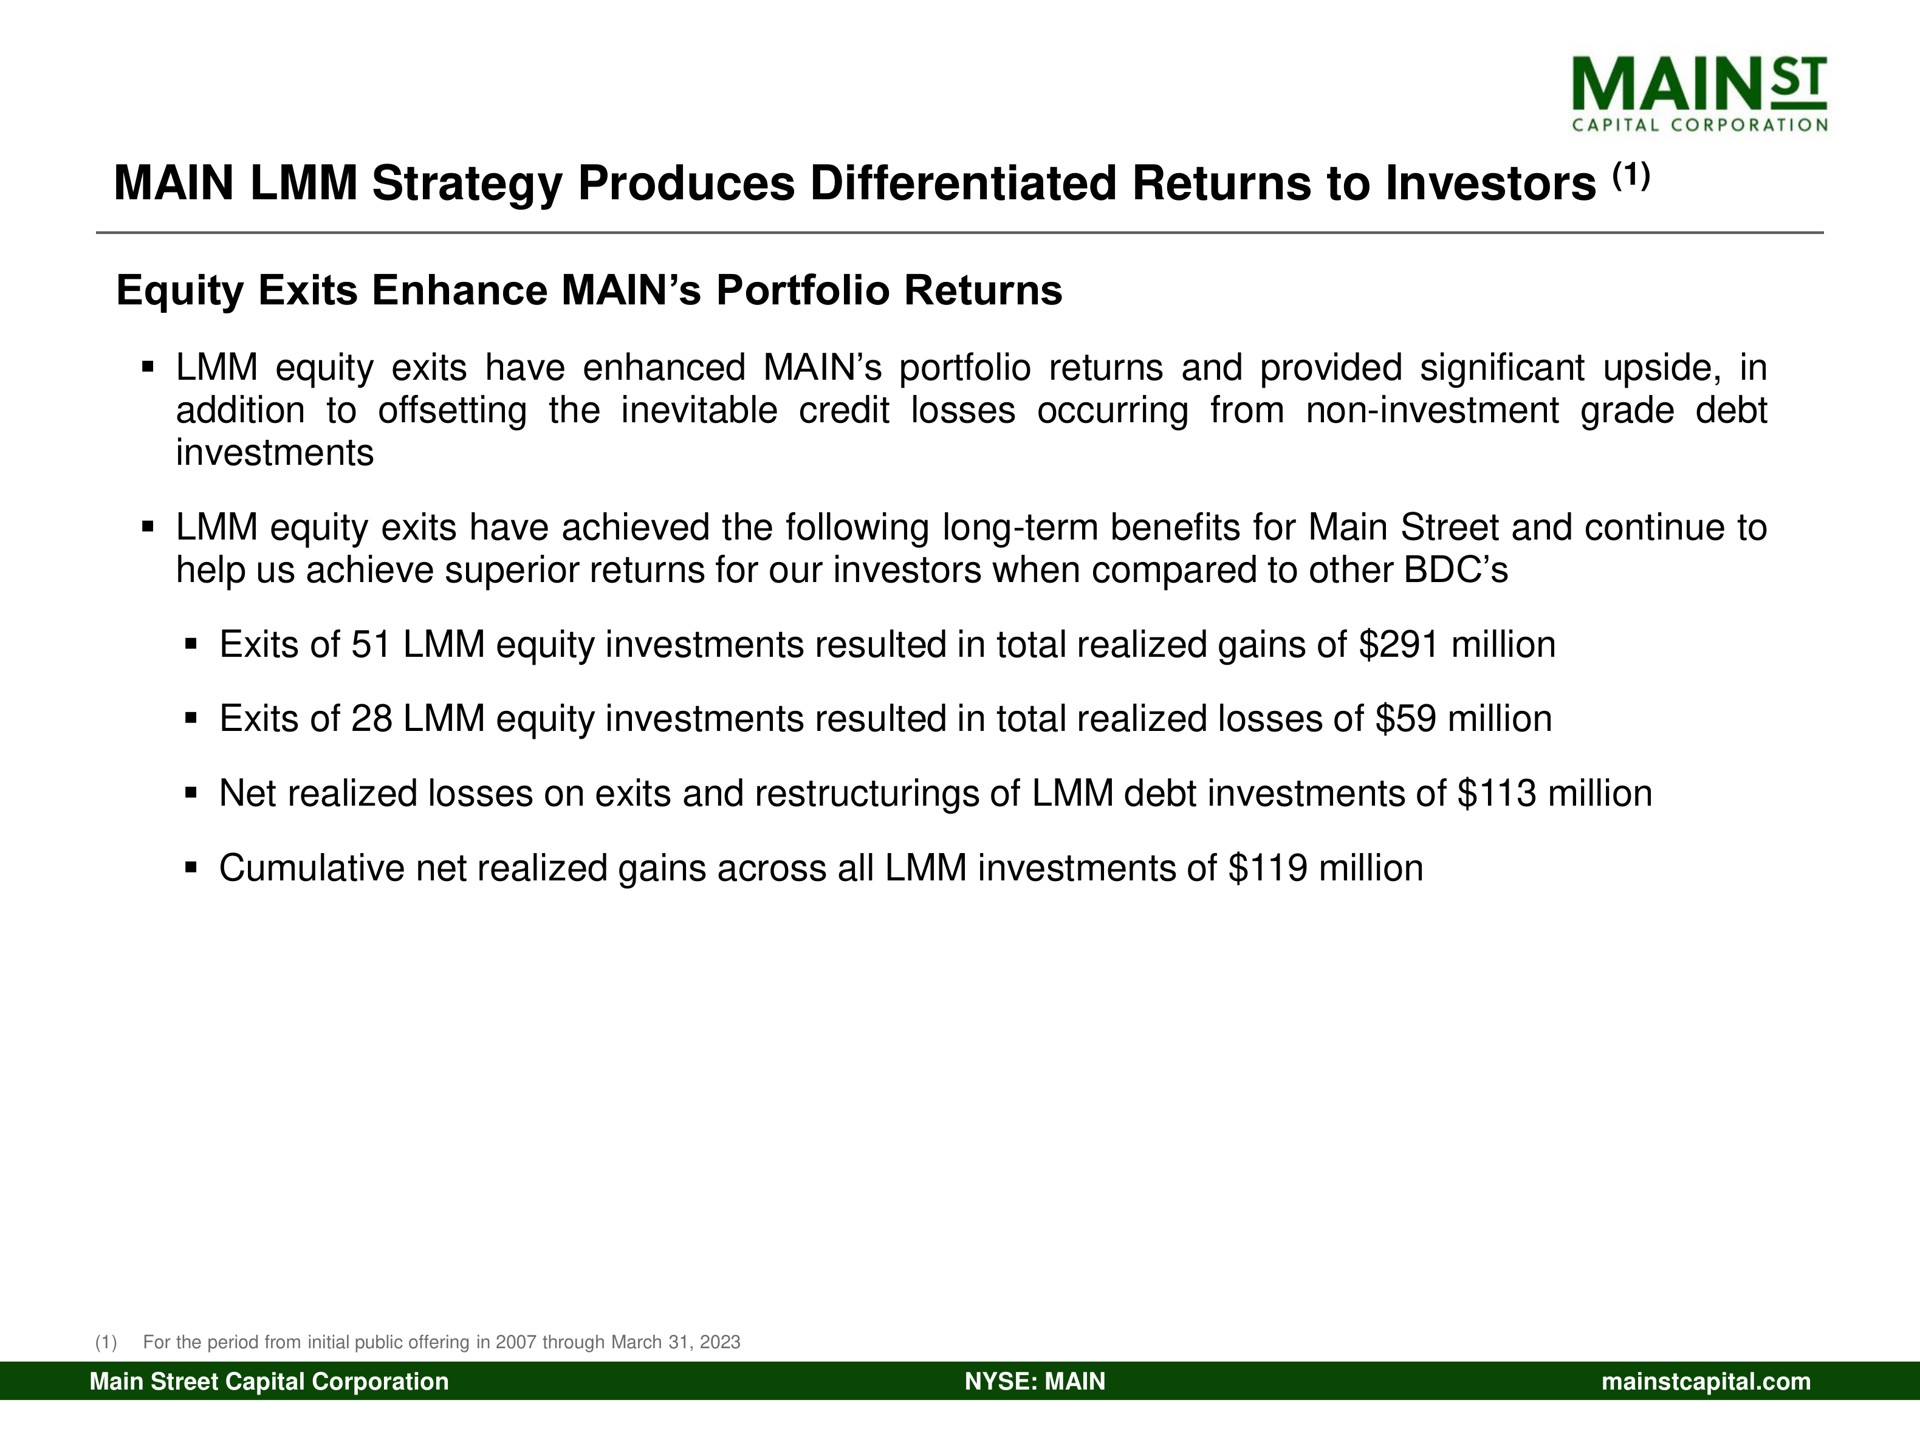 main strategy produces differentiated returns to investors equity exits enhance main portfolio returns mains | Main Street Capital